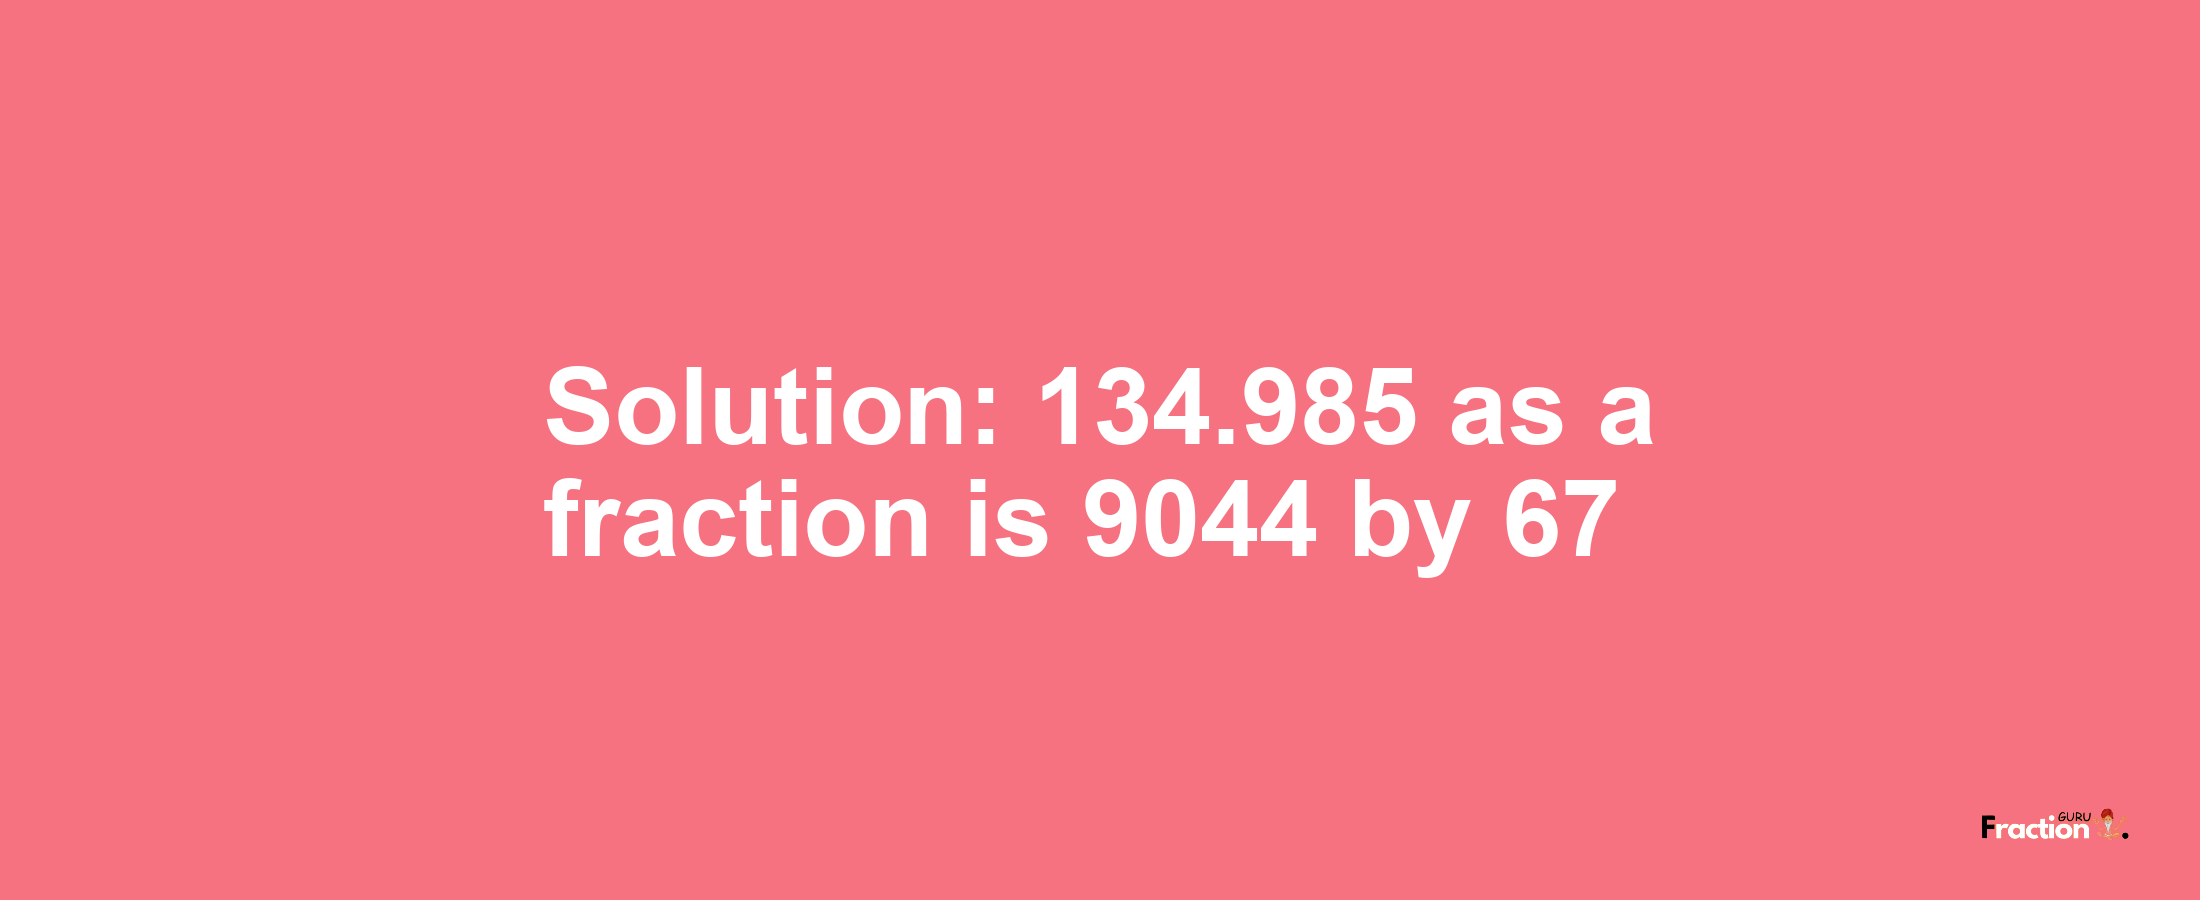 Solution:134.985 as a fraction is 9044/67